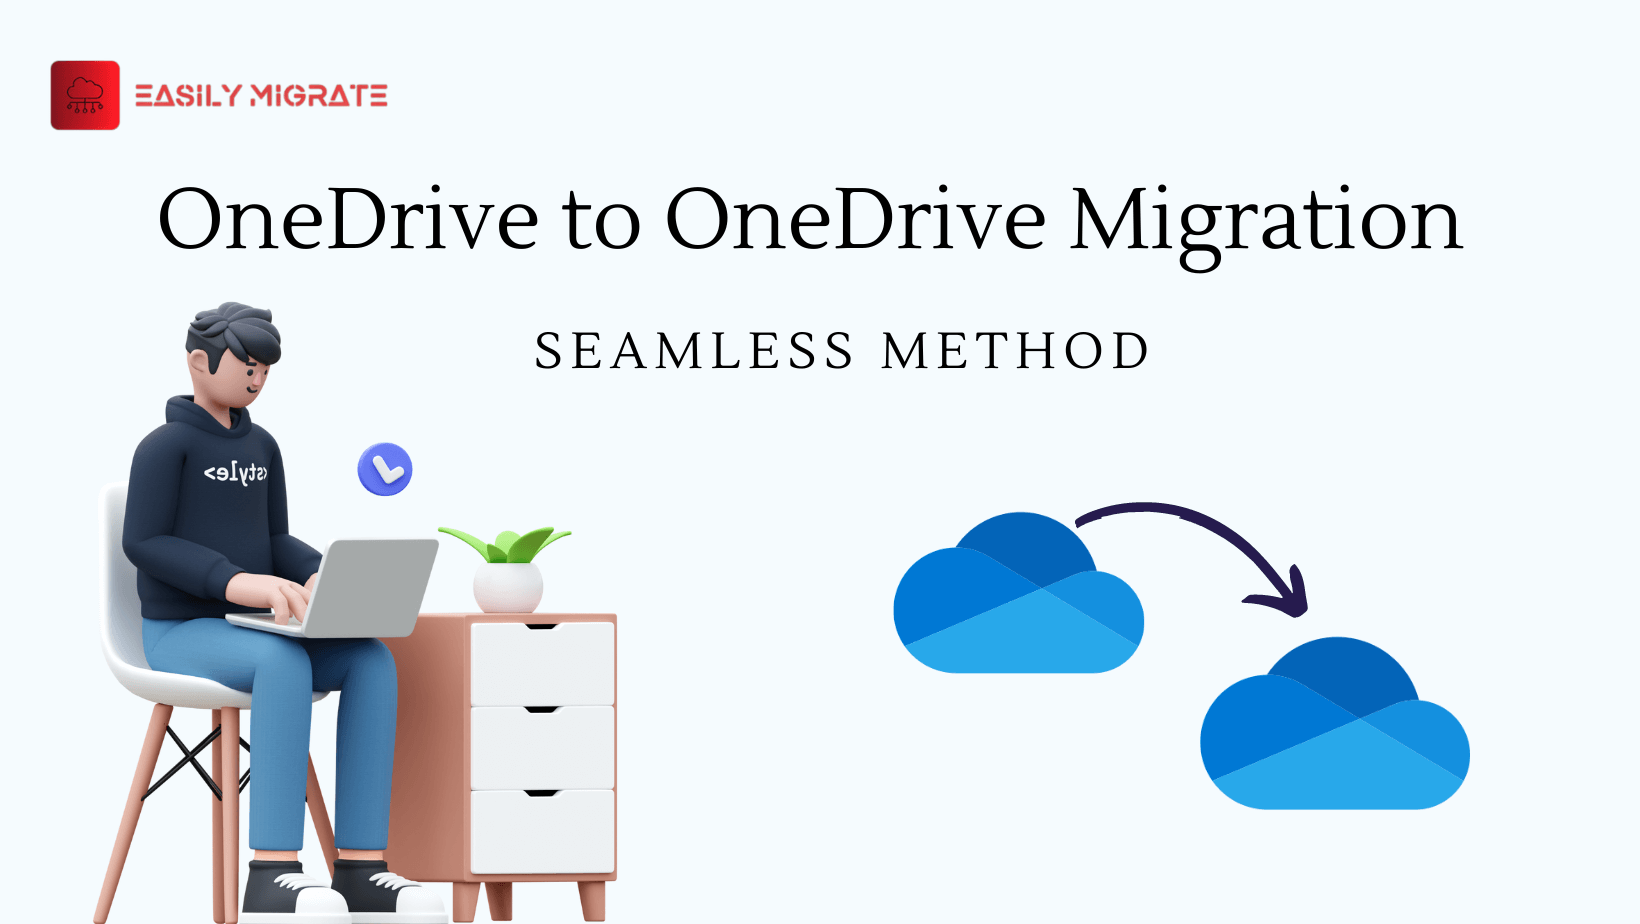 Seamlessly Method for OneDrive to OneDrive Migration